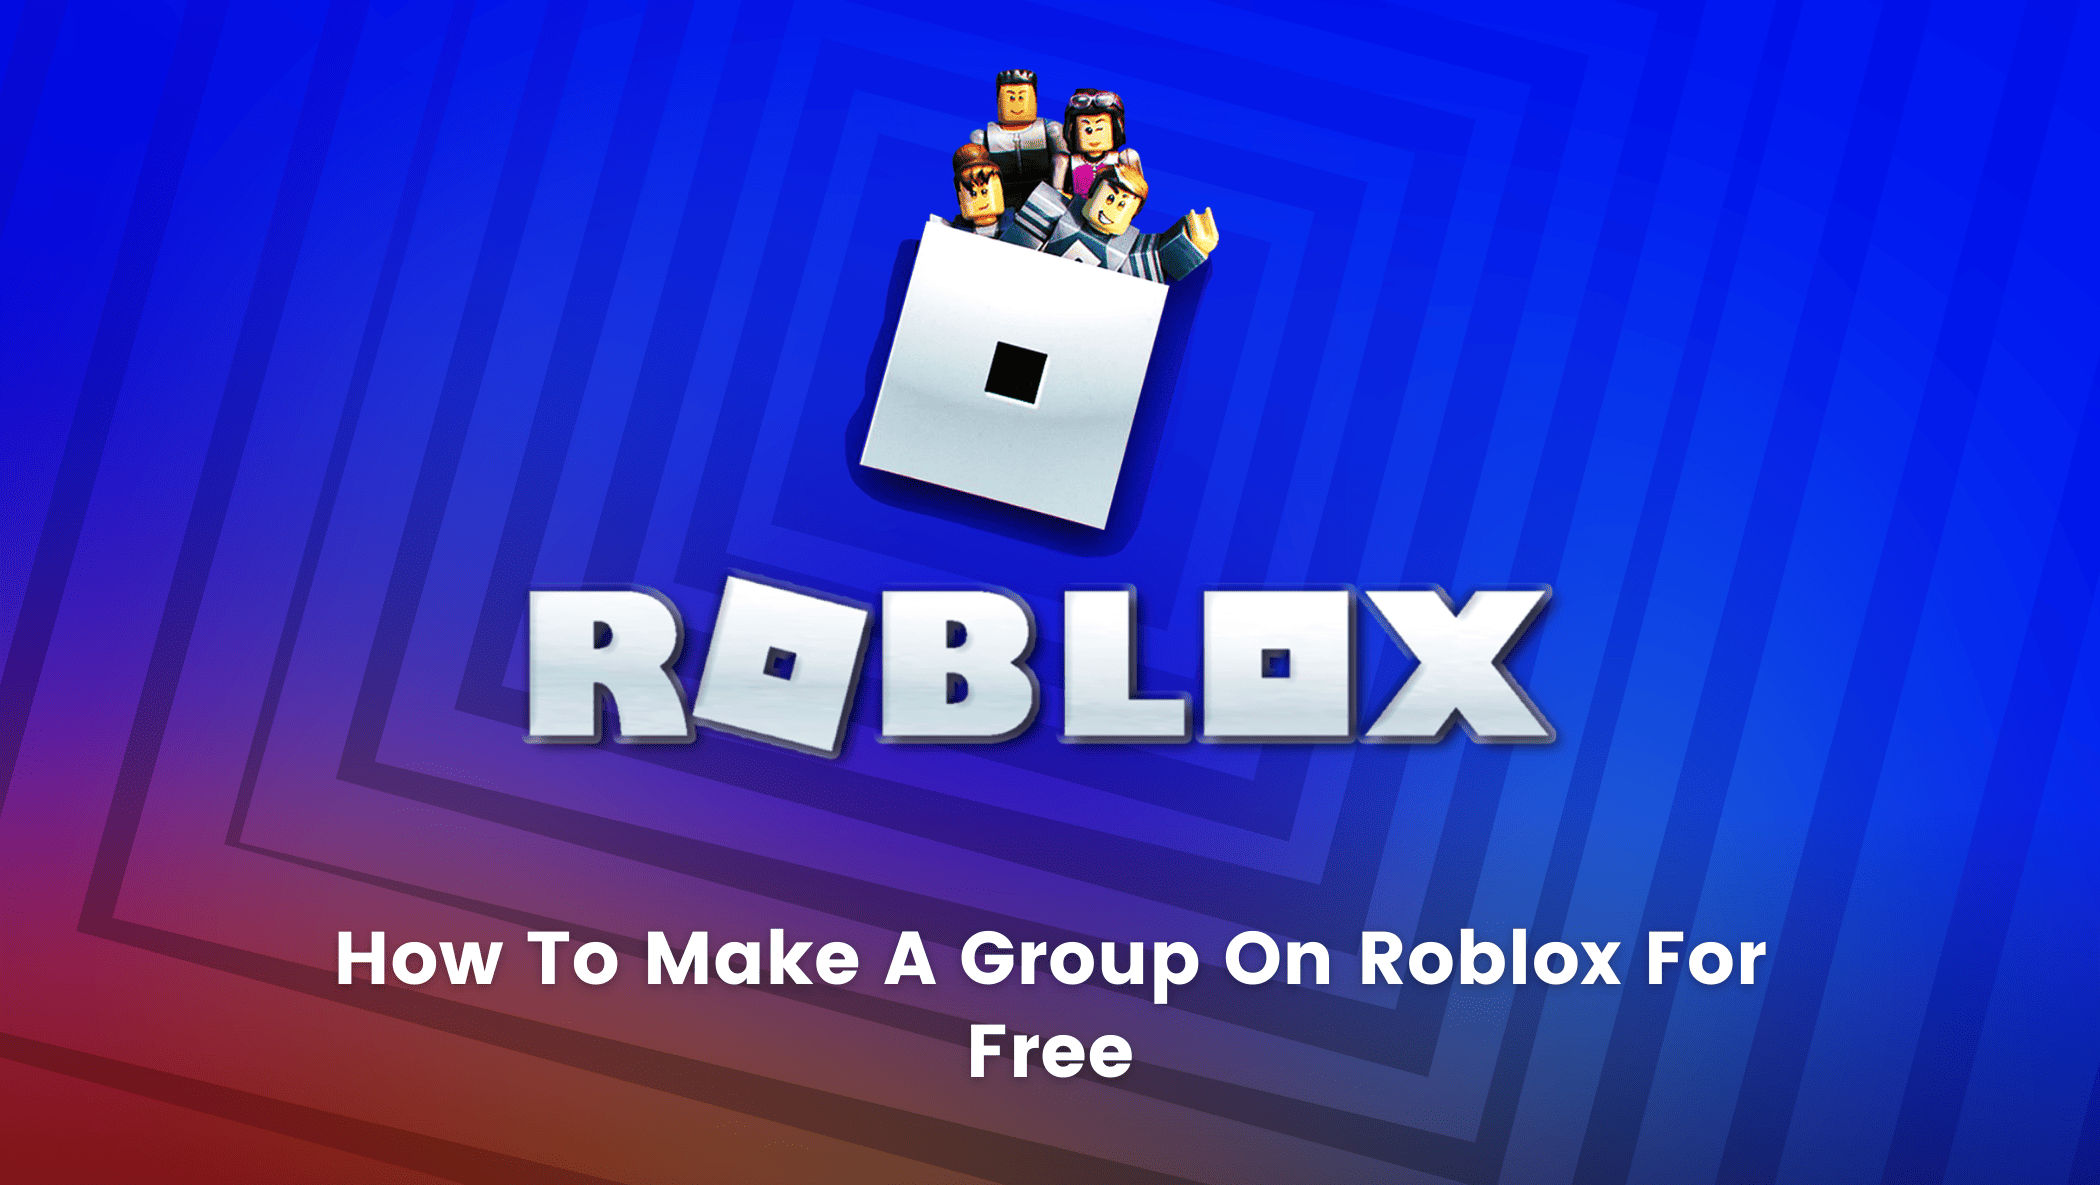 How To Make A Group On Roblox For Free